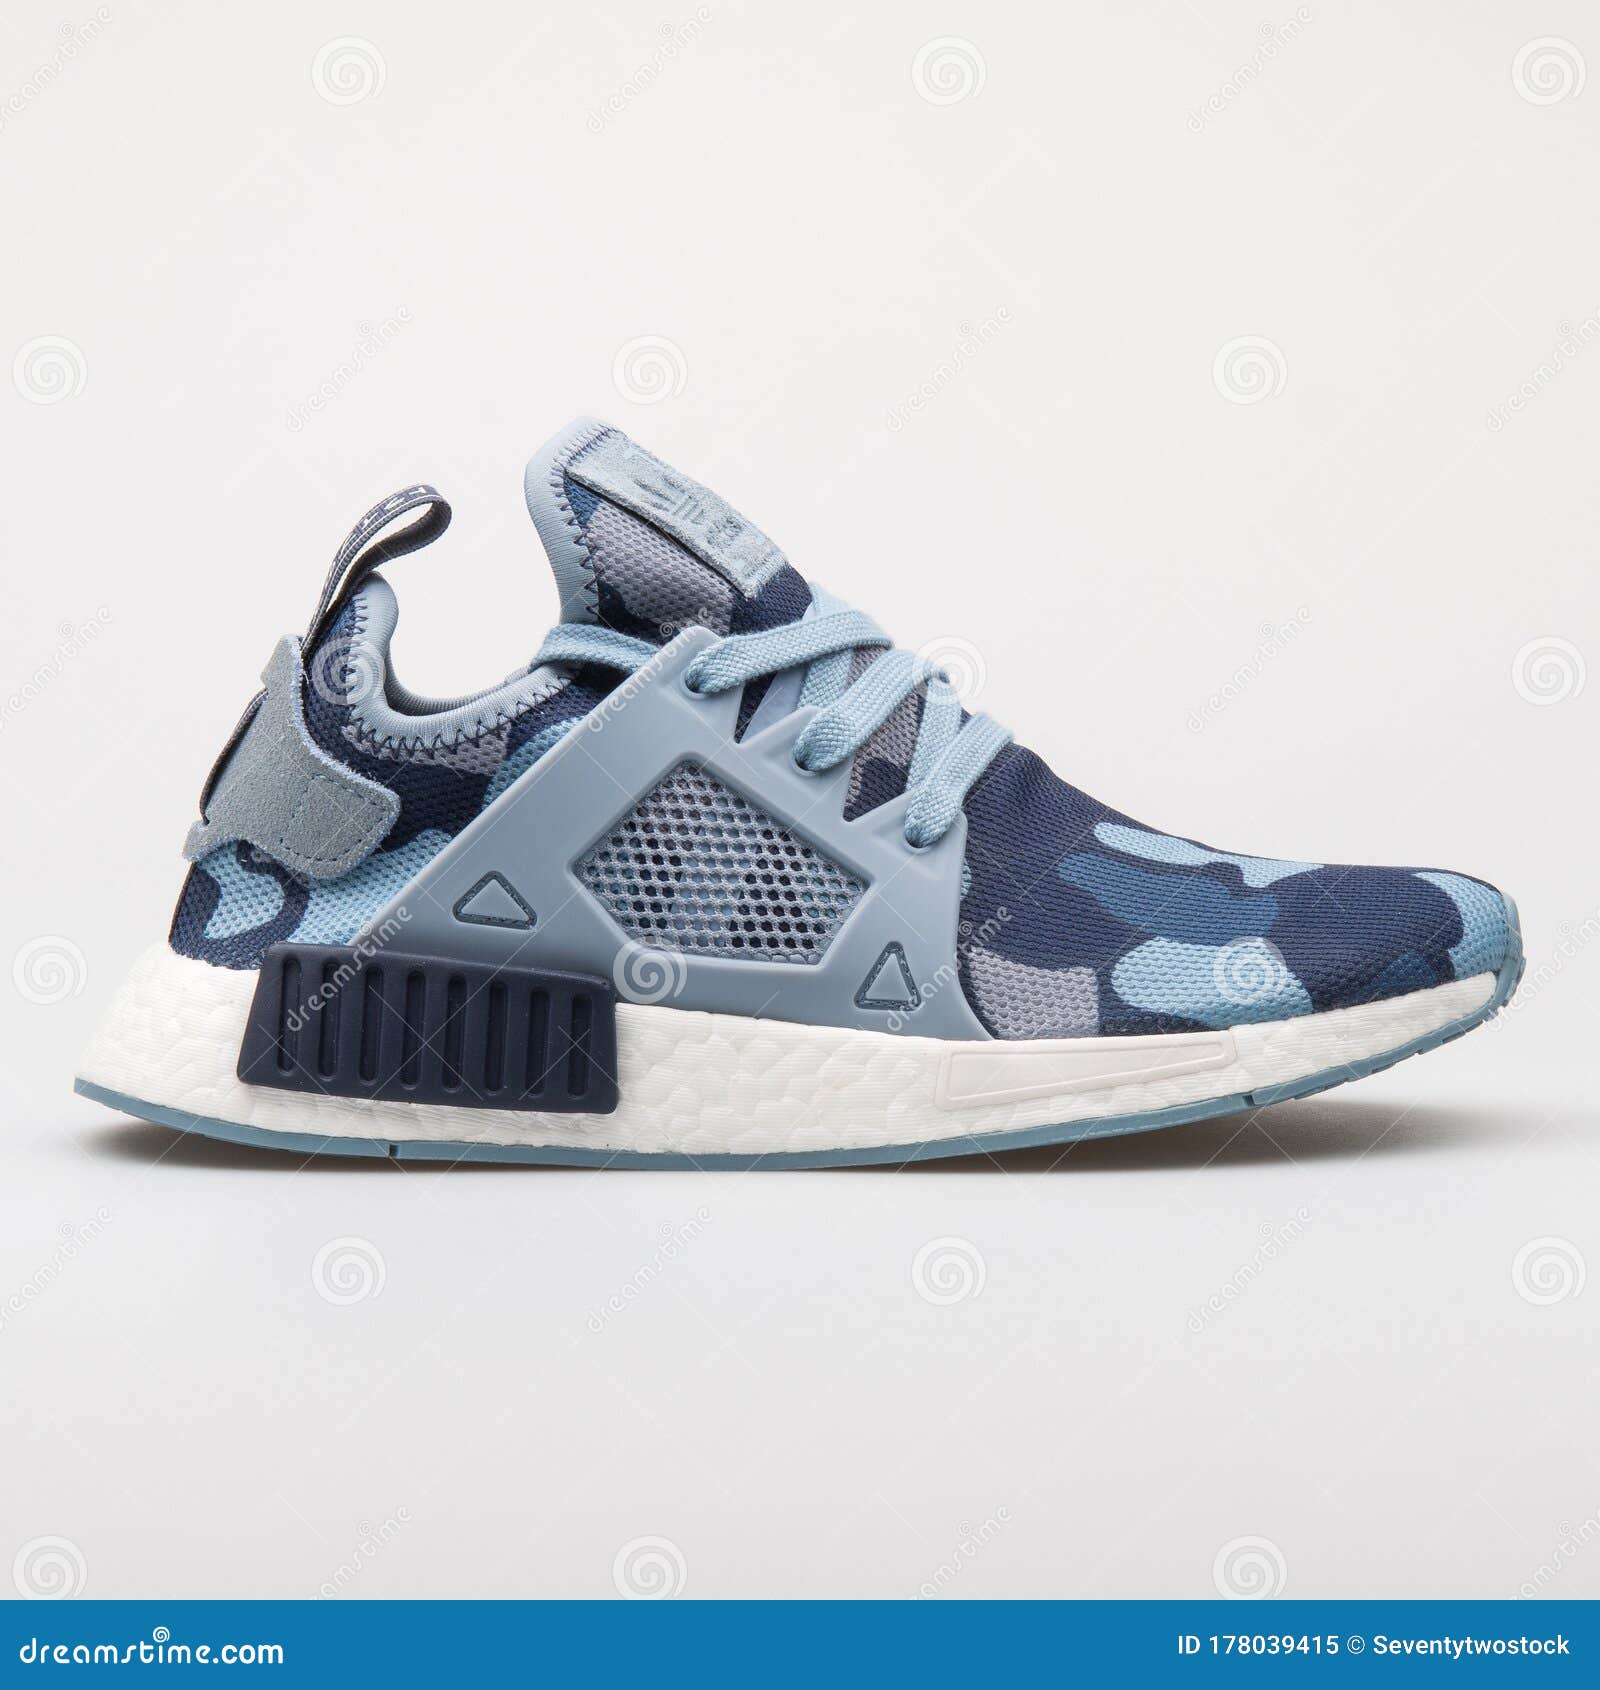 Adidas NMD XR1 Athletic Shoes Size 12 for Men for Sal.